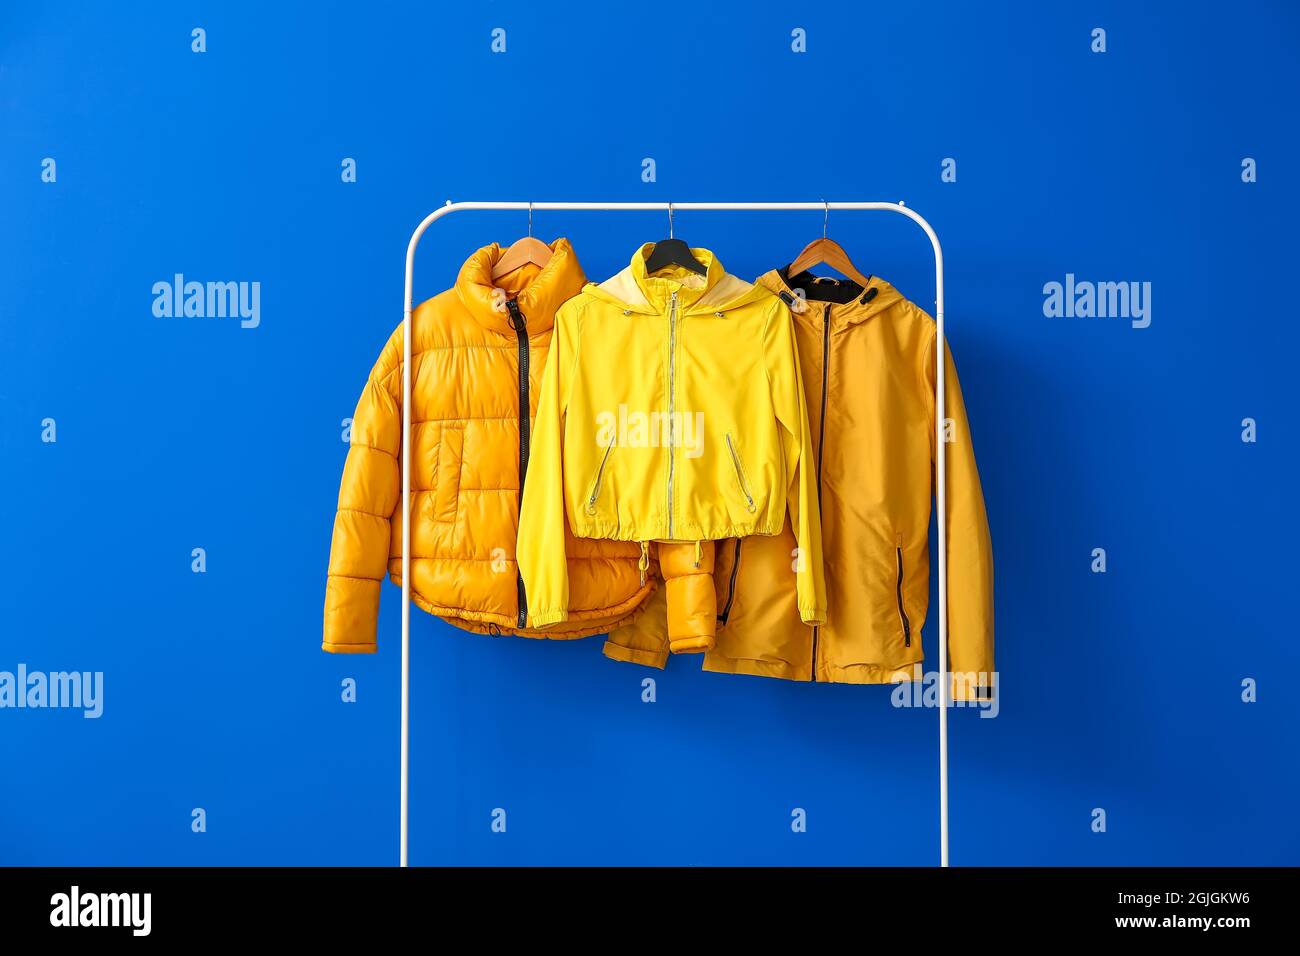 Rack with bright jackets on color background Stock Photo